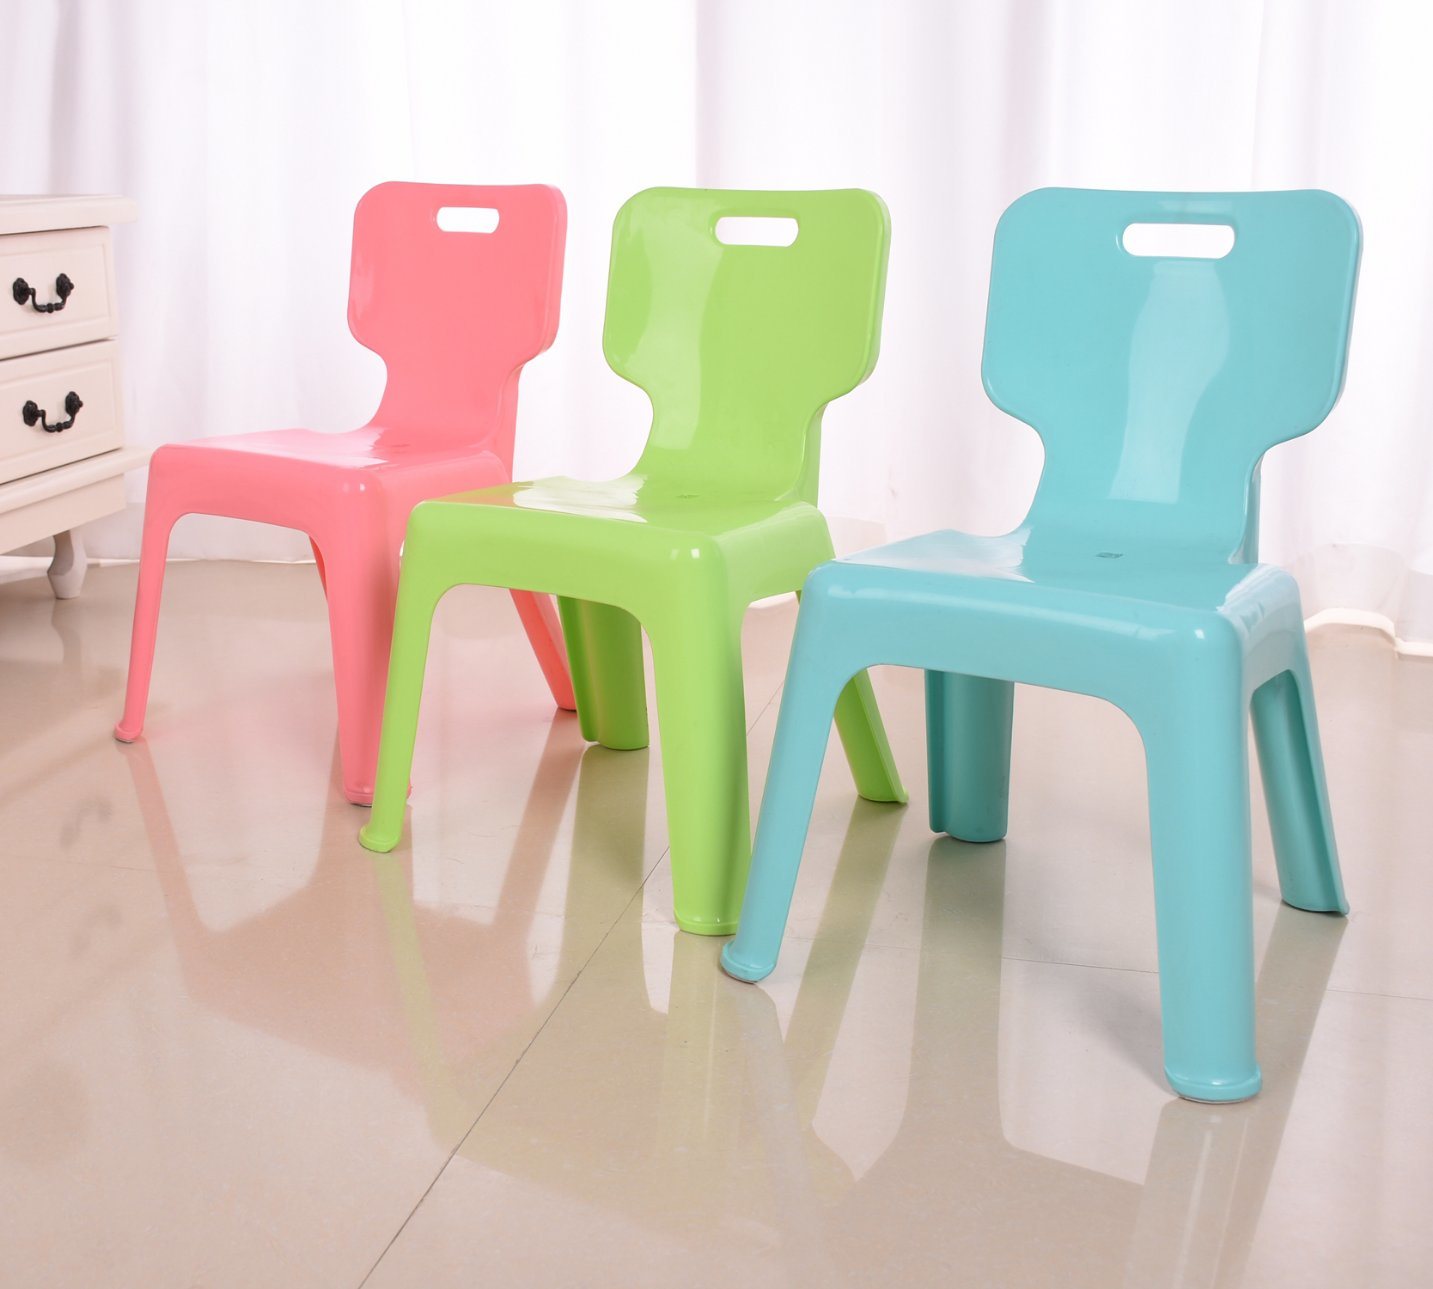 Colorful Plastic Chair with Backrest for Kids/Children